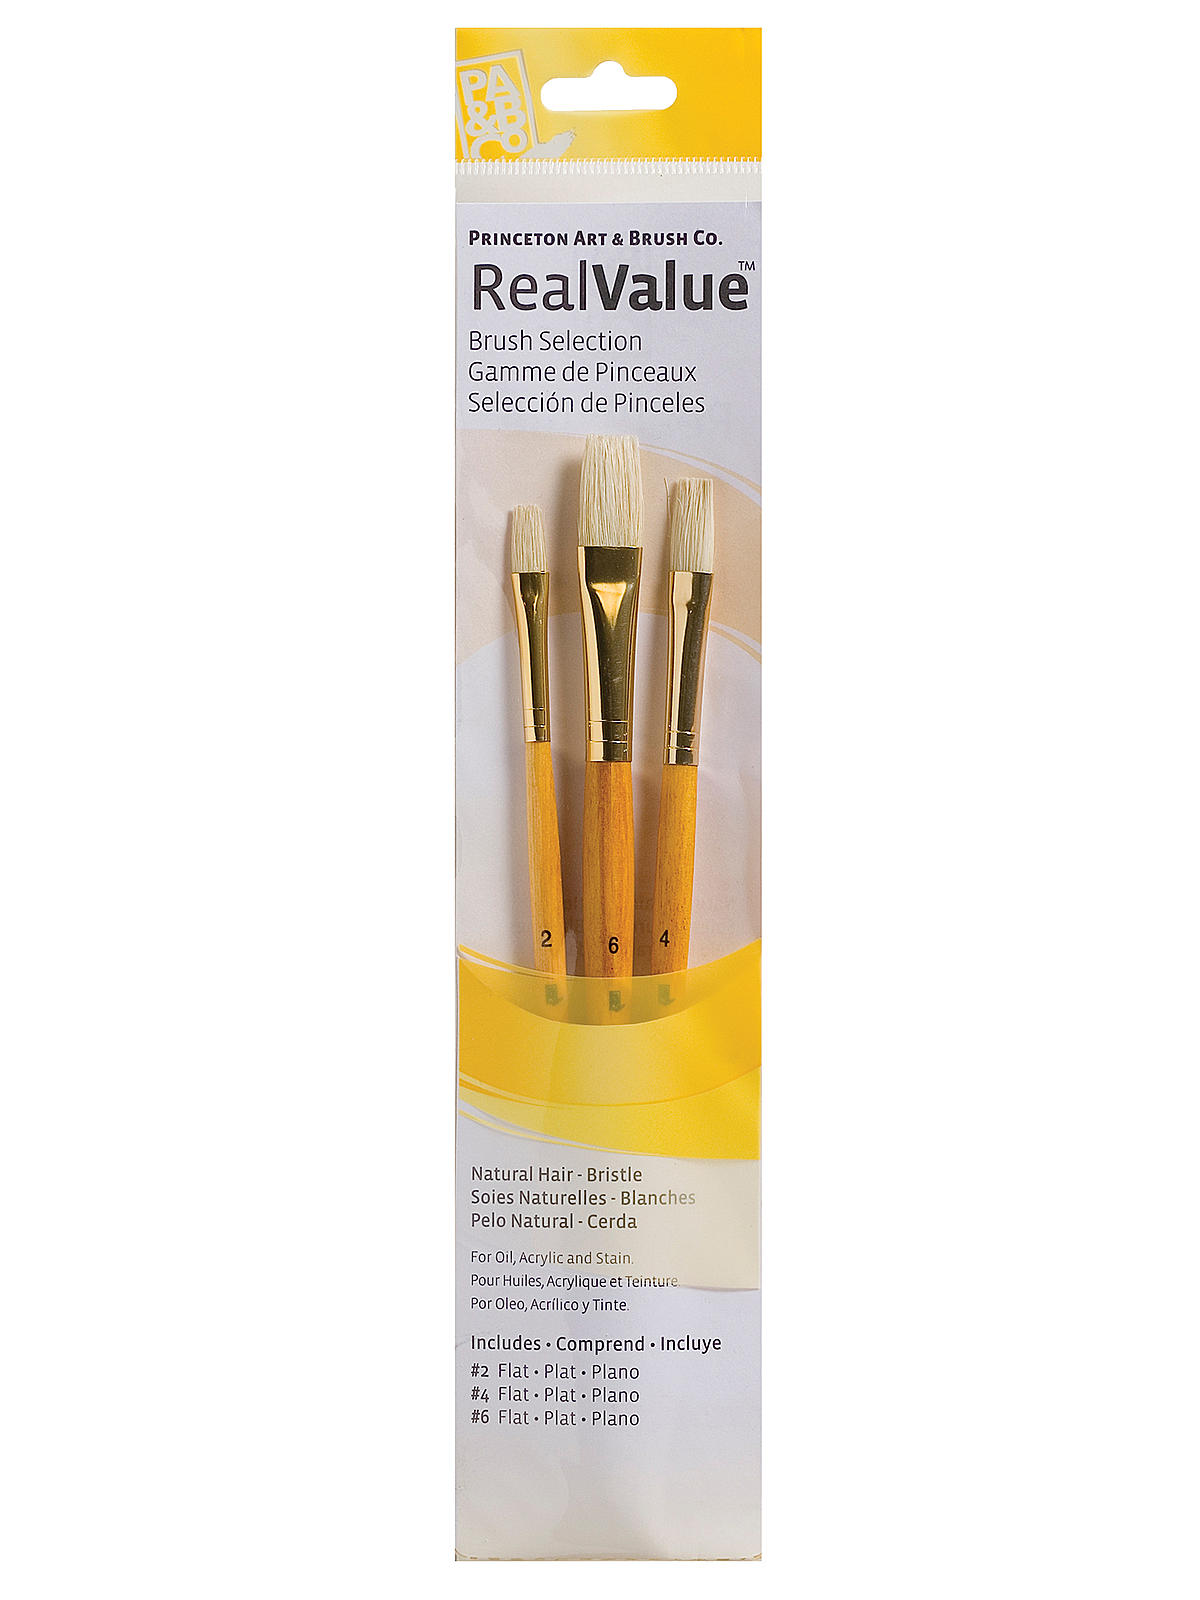 Real Value Series 9000 Yellow Handle Brush Sets 9104 Set Of 3